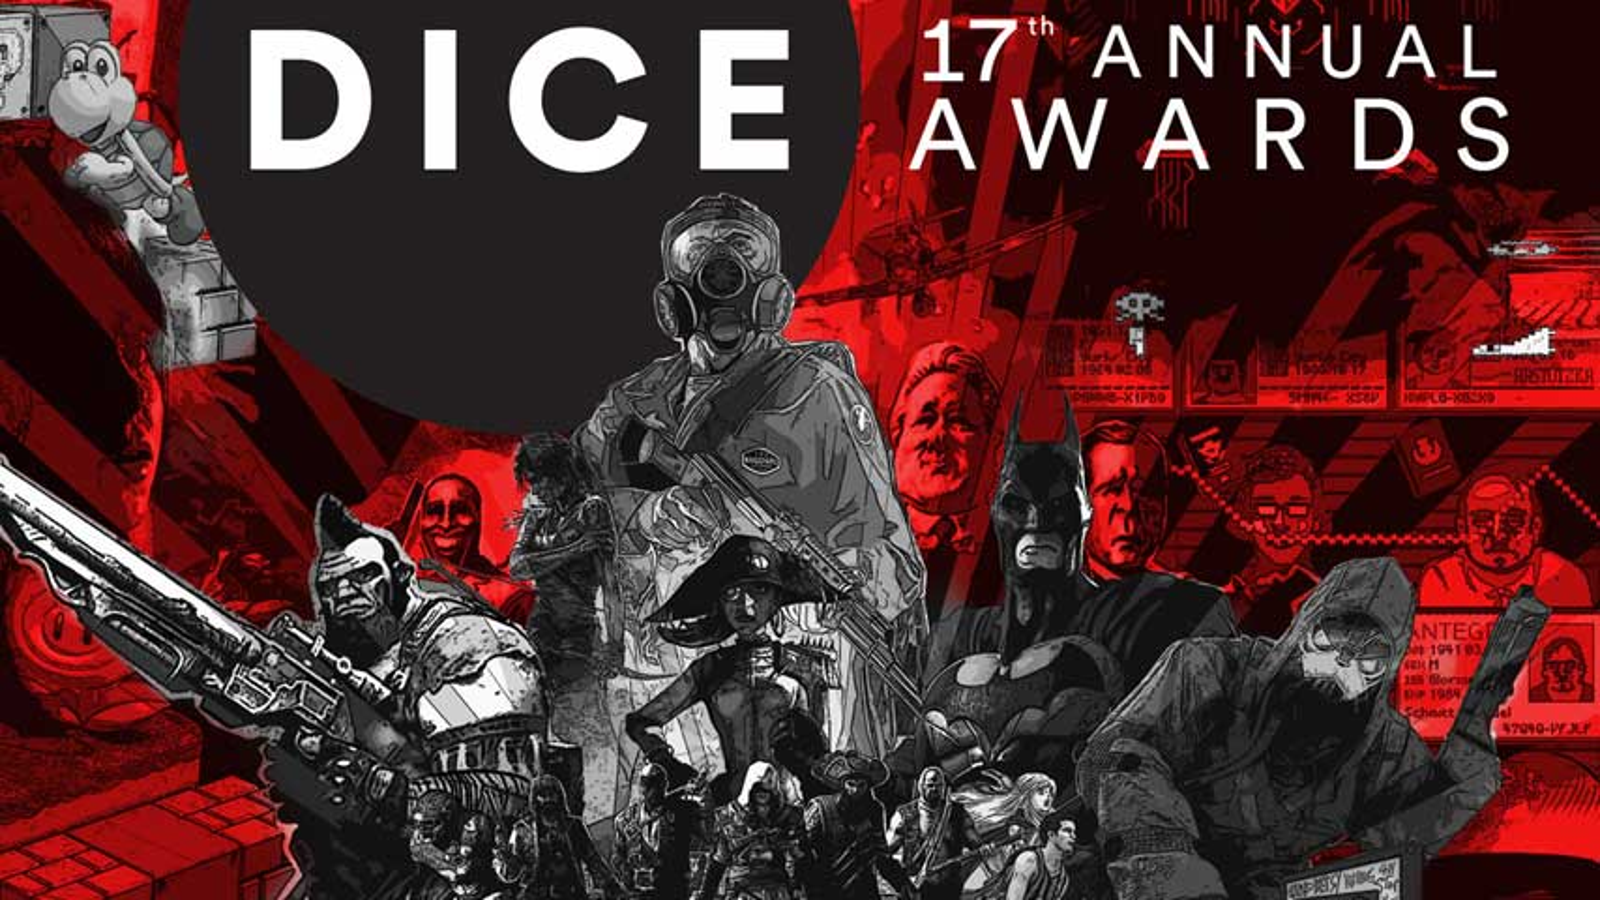 GameSpot - Game Awards has recorded that 143 media outlets awarded Game of  the Year to The Last of Us Part 2 and it received a further 63 readers'  choice awards too.